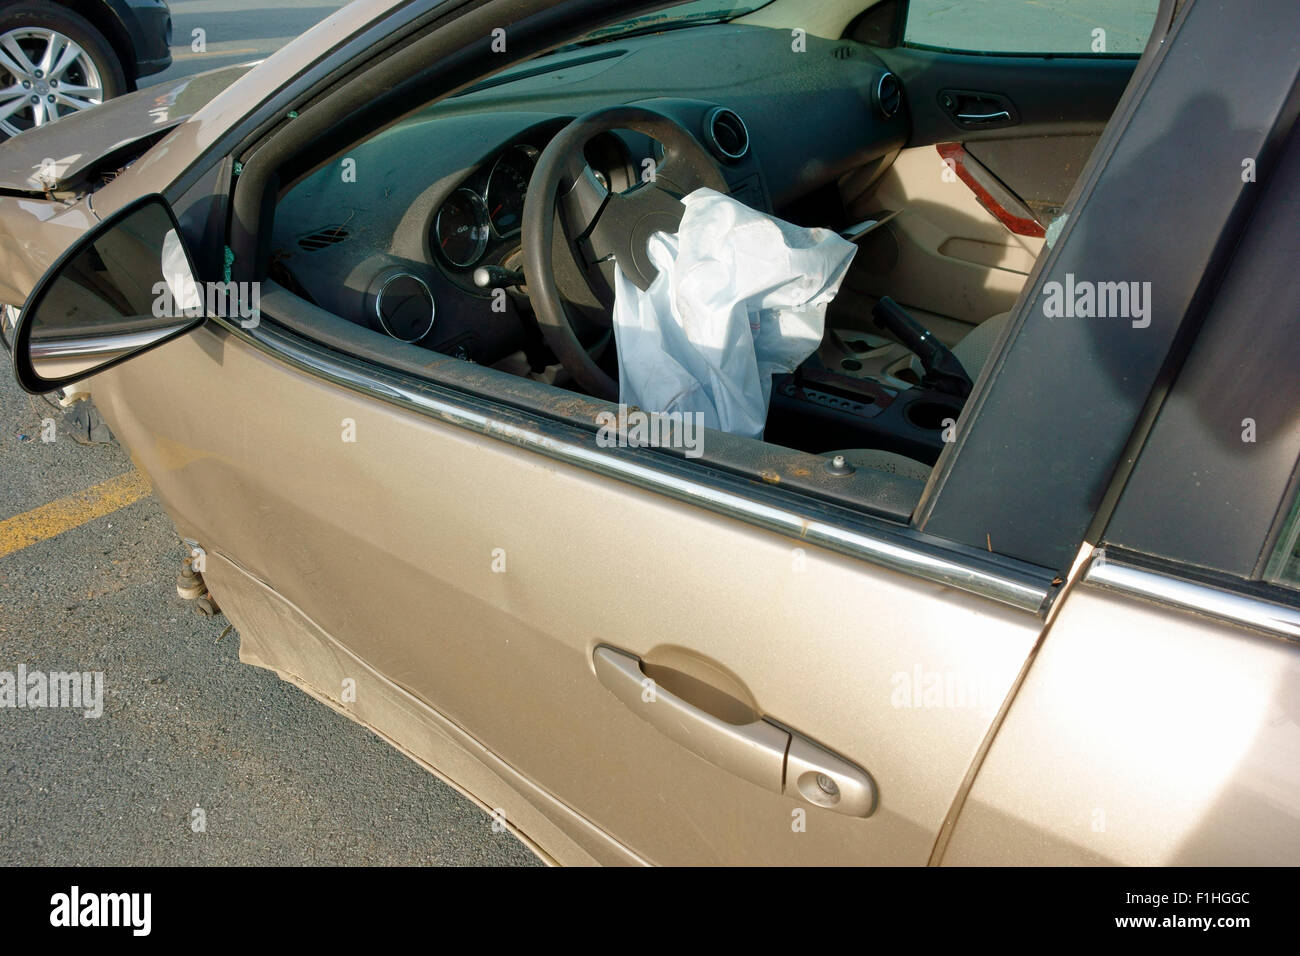 A car vehicle highway accident showing the driver's side steering wheel airbag that has been activated or inflated Stock Photo